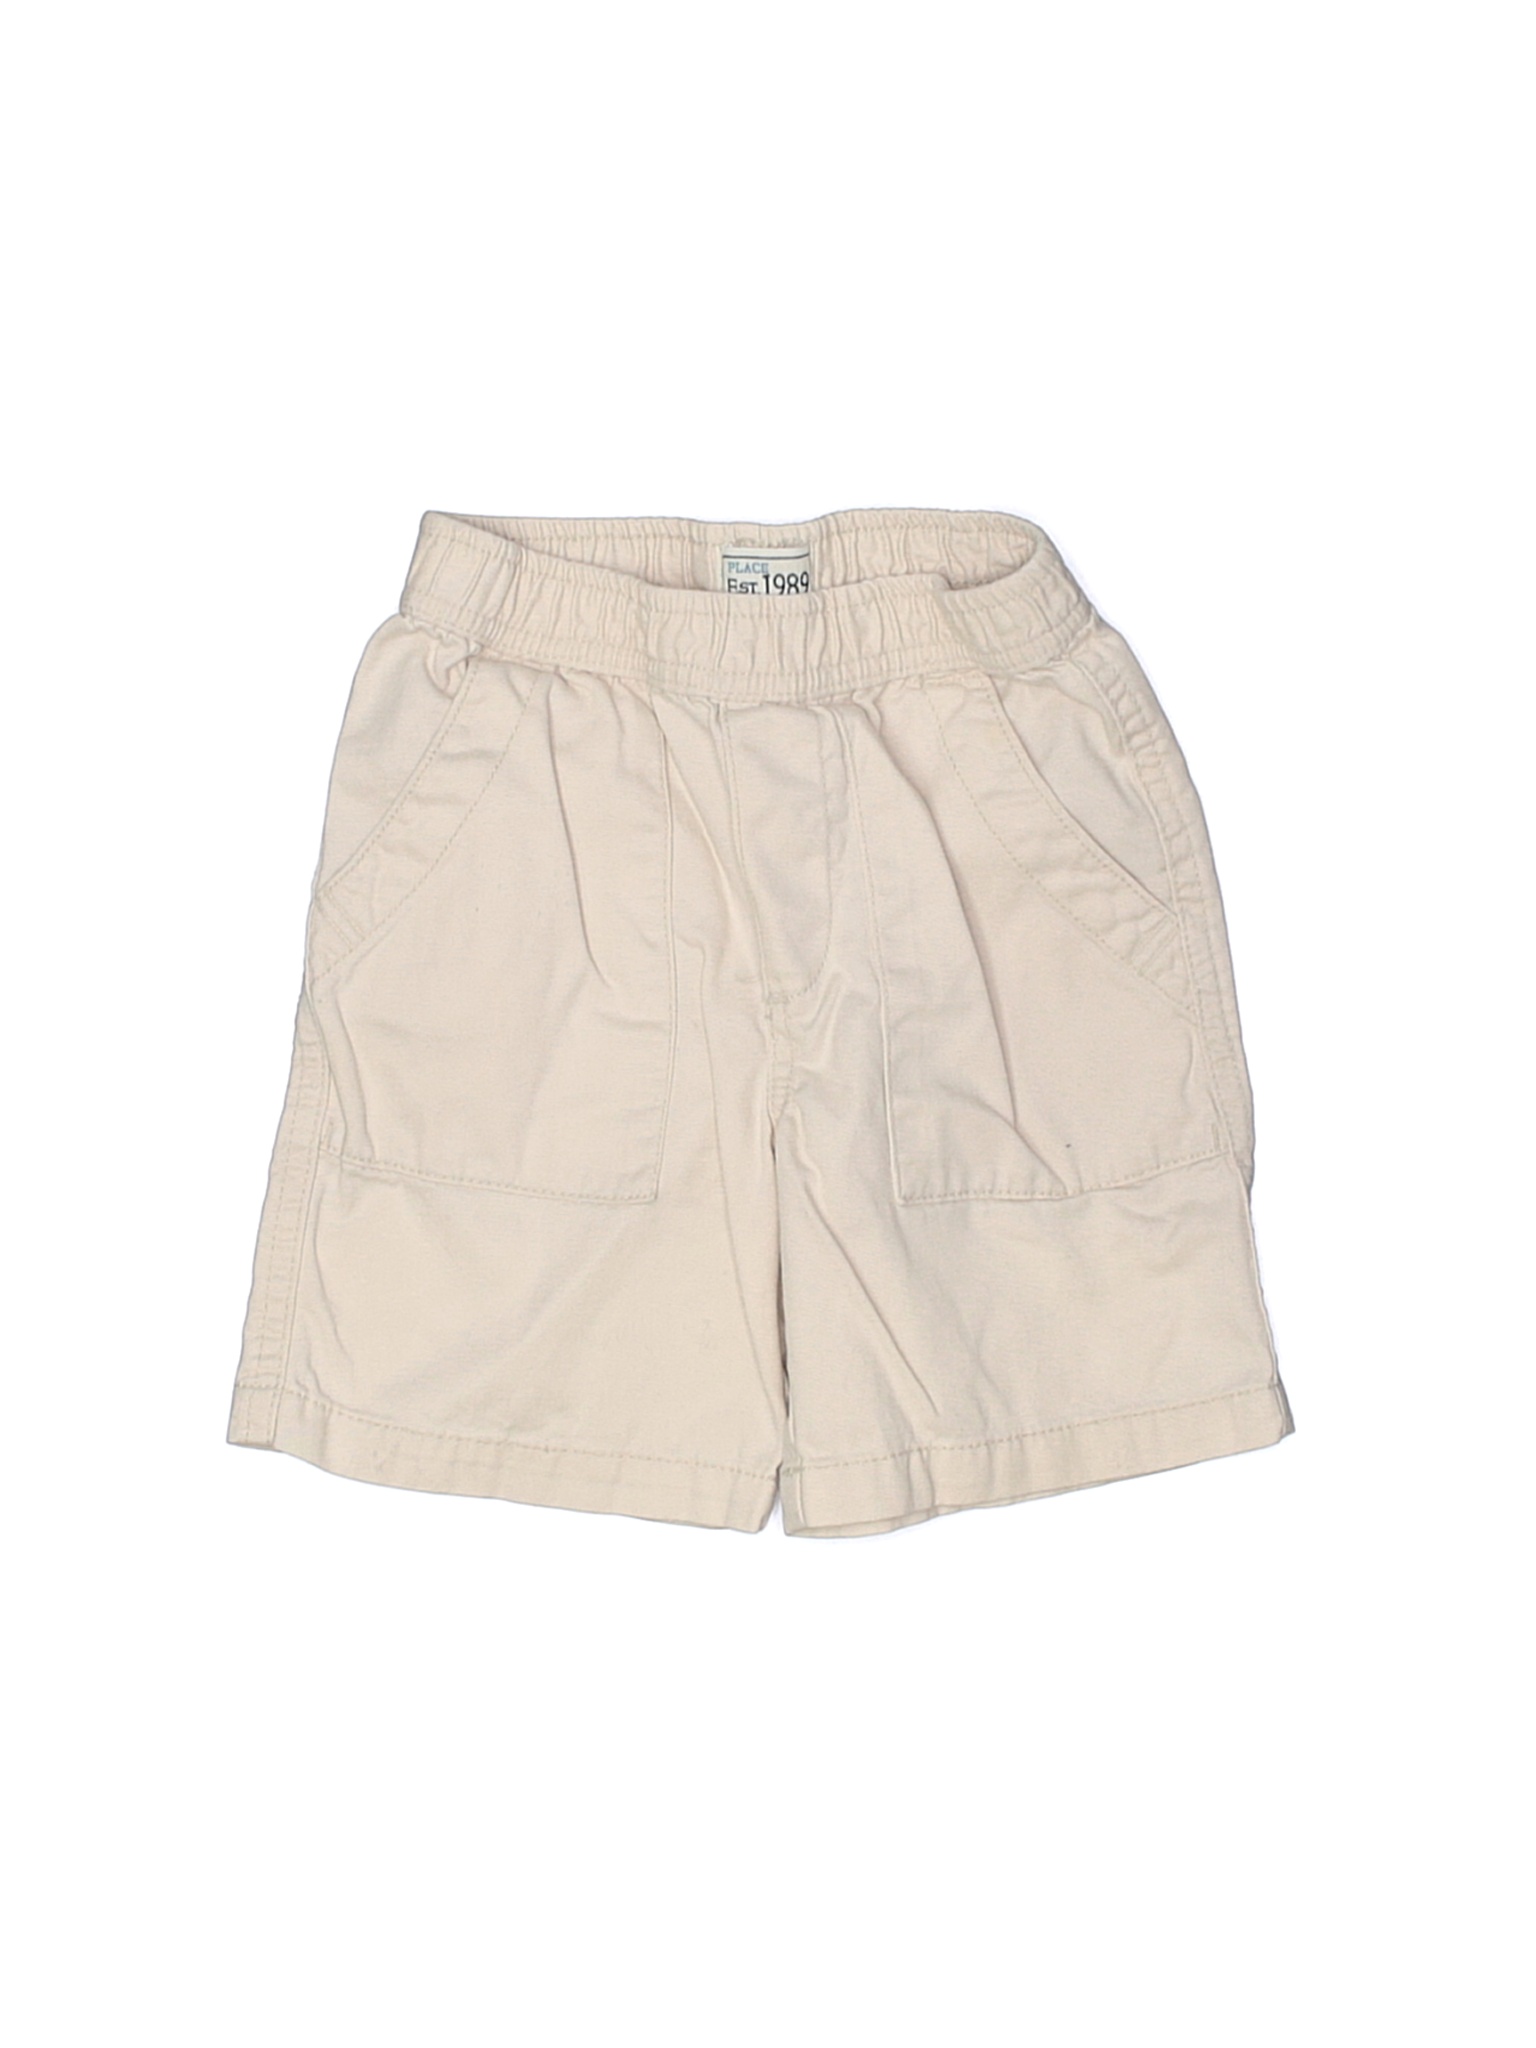 The Childrens Place Boys 2 Pack Solid Mesh Shorts